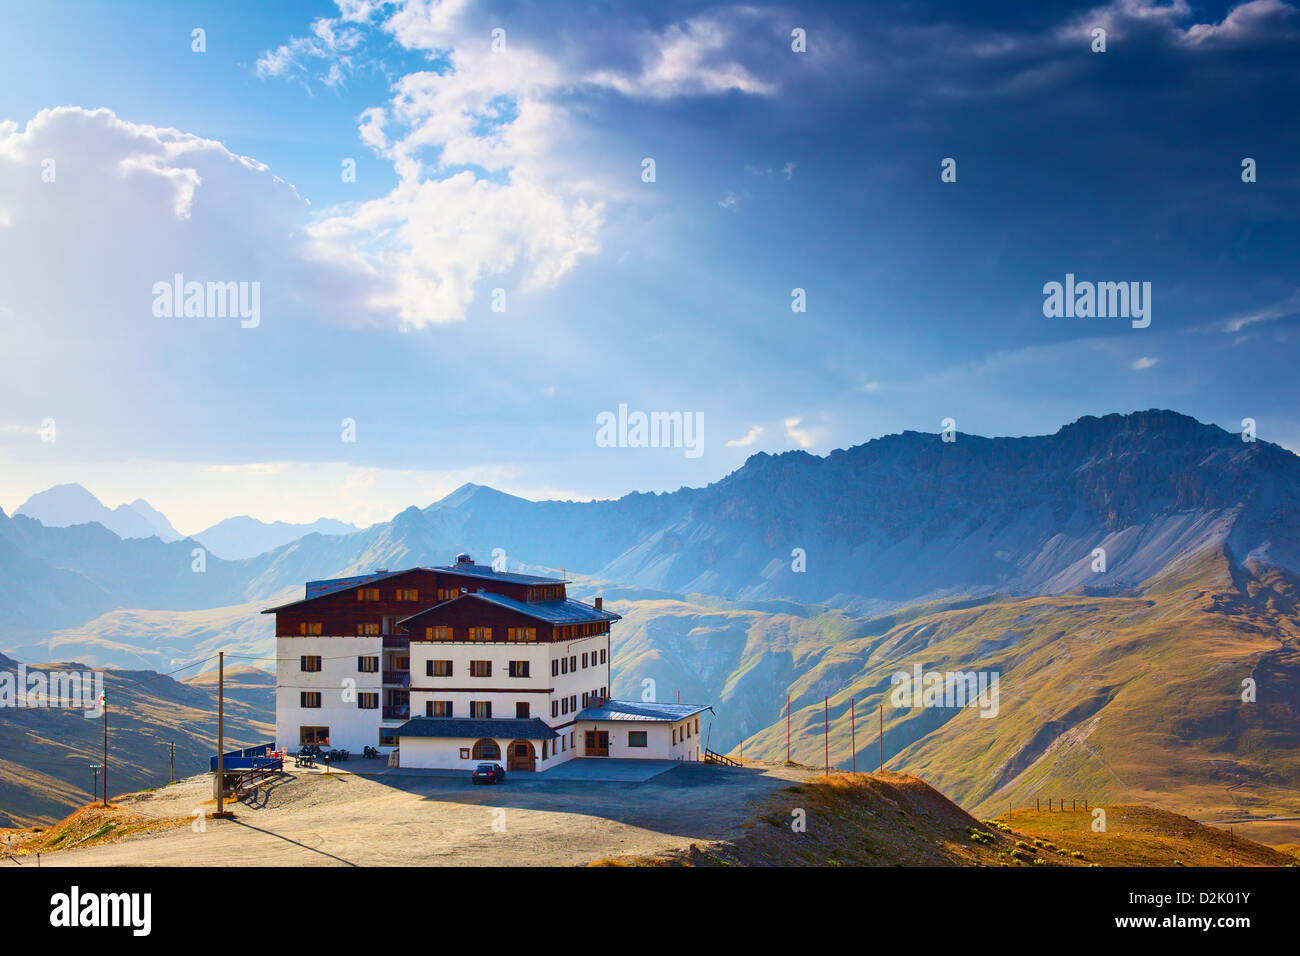 Alps mountain landscape with house on foreground. Stock Photo